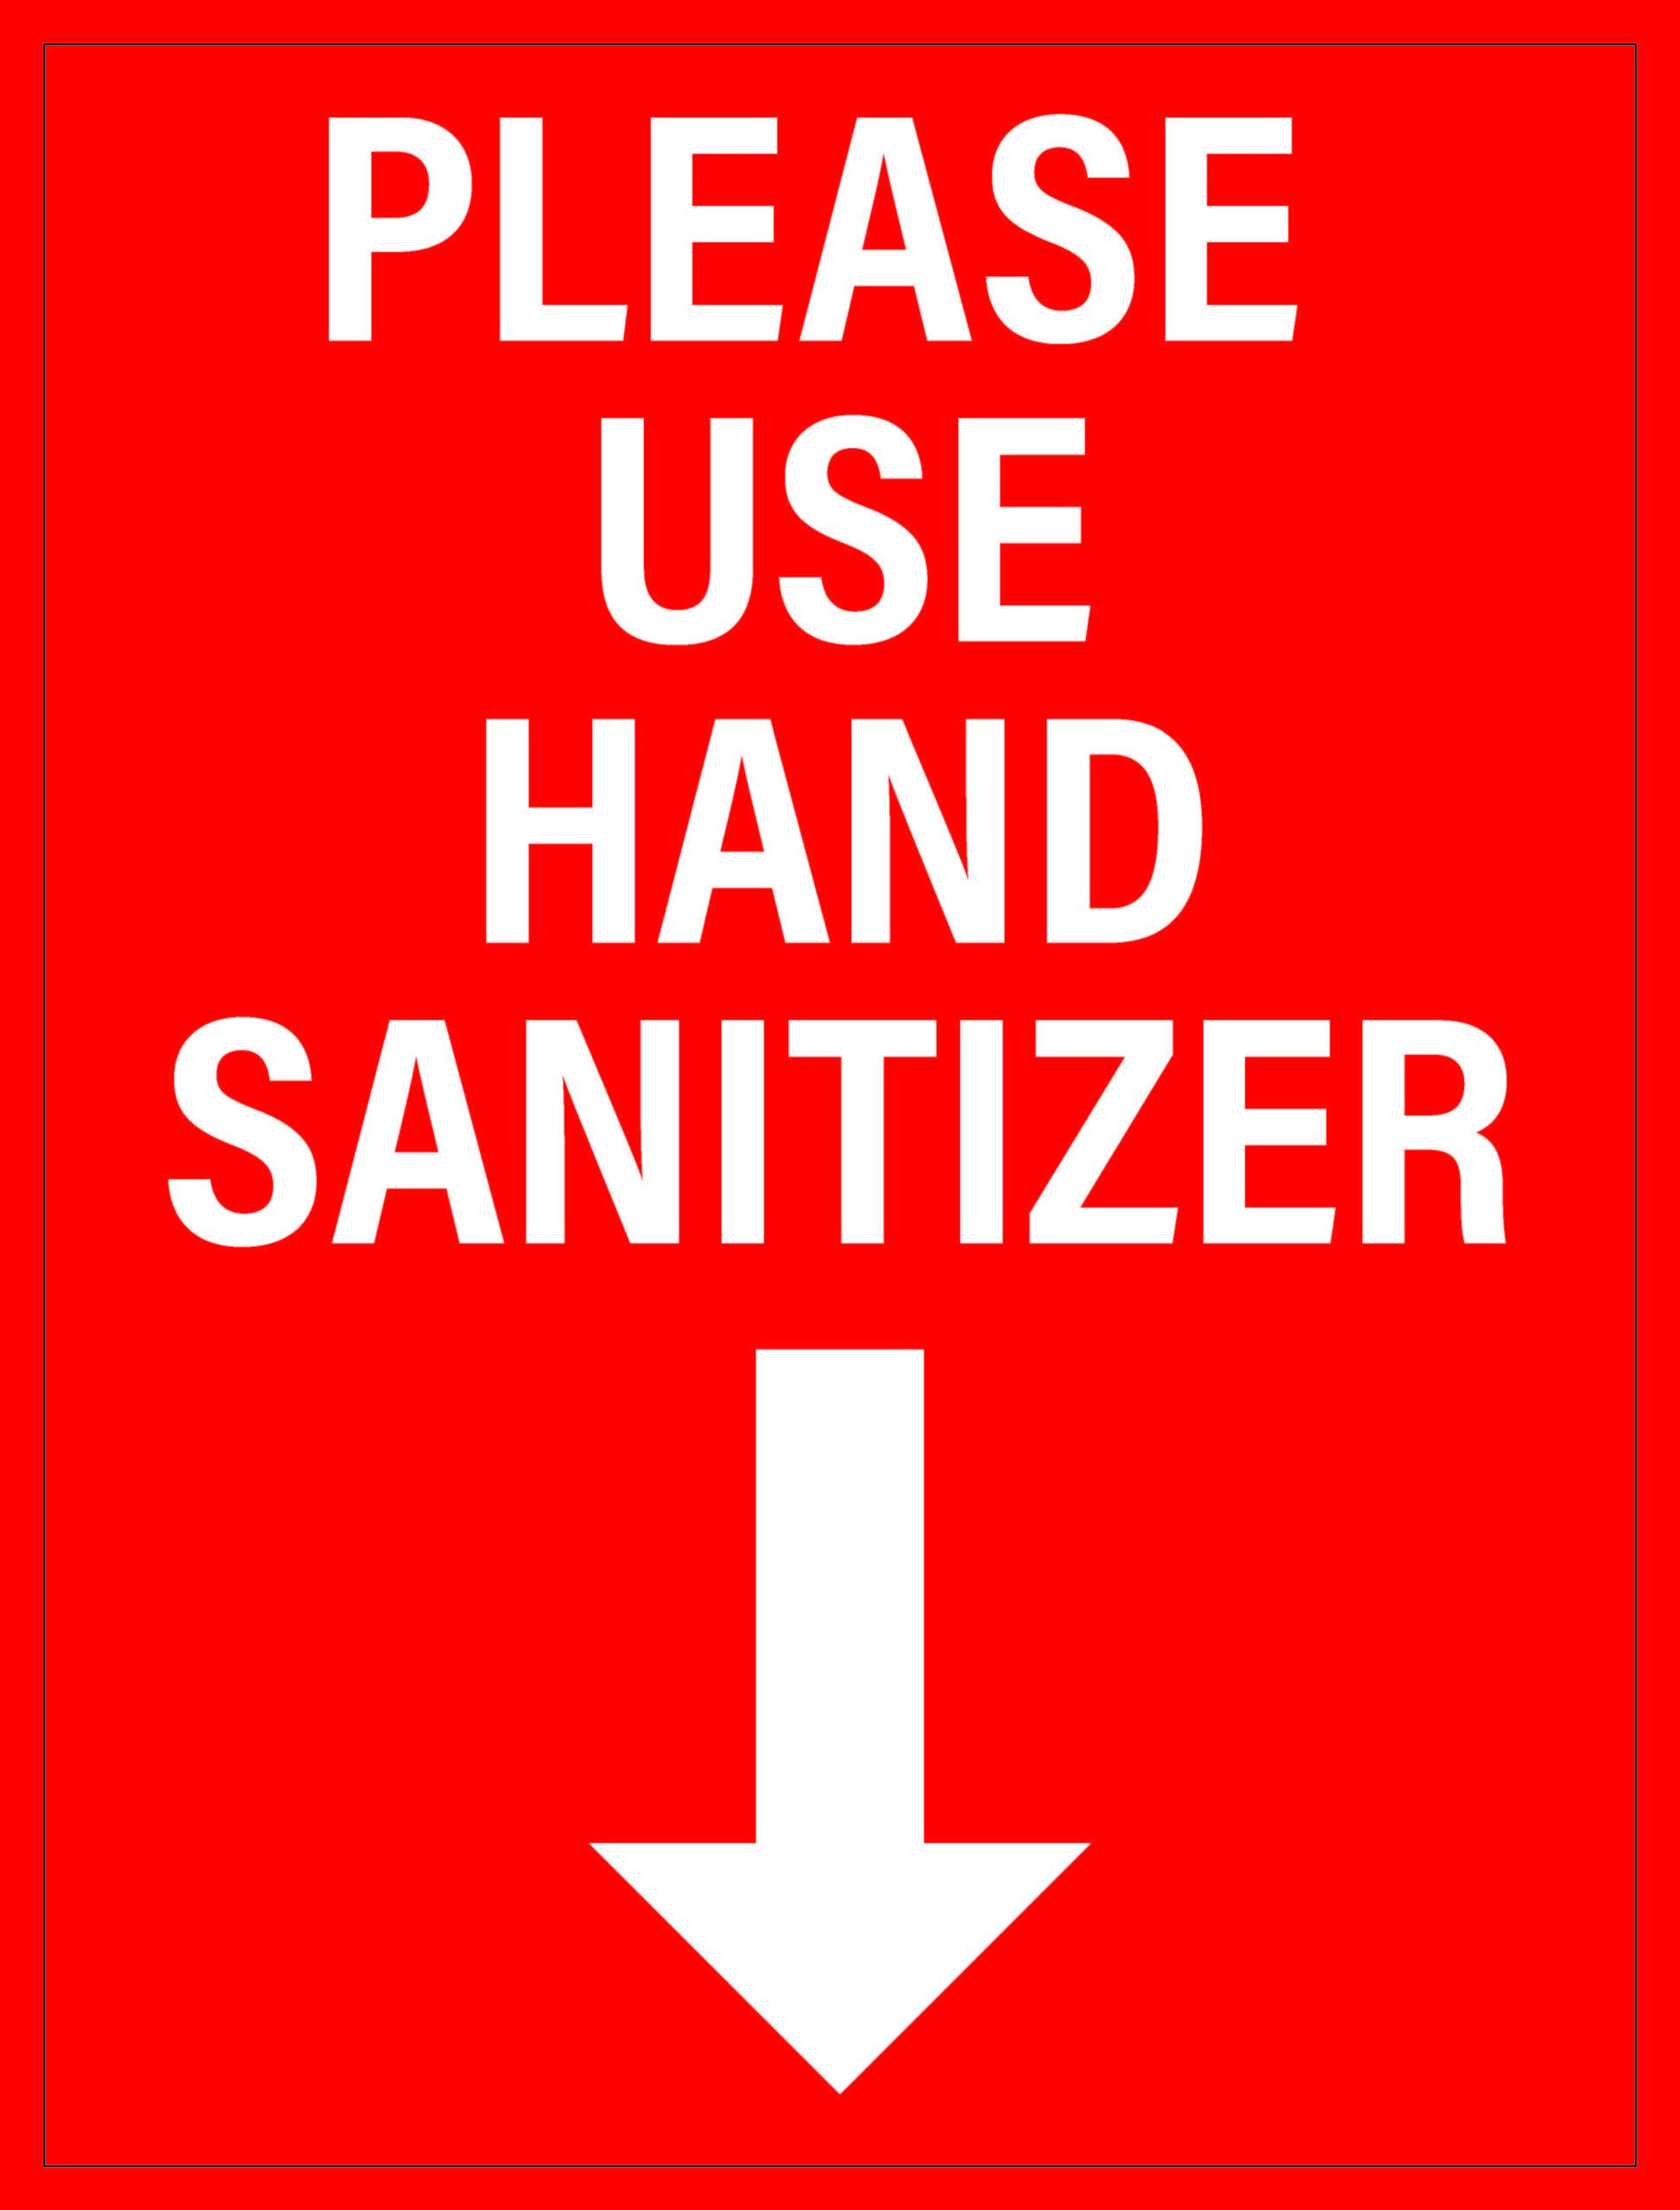 CORO SIGN: Hand Sanitizer Stand Coro Sign 18x24" (Sold in Groups of 2)